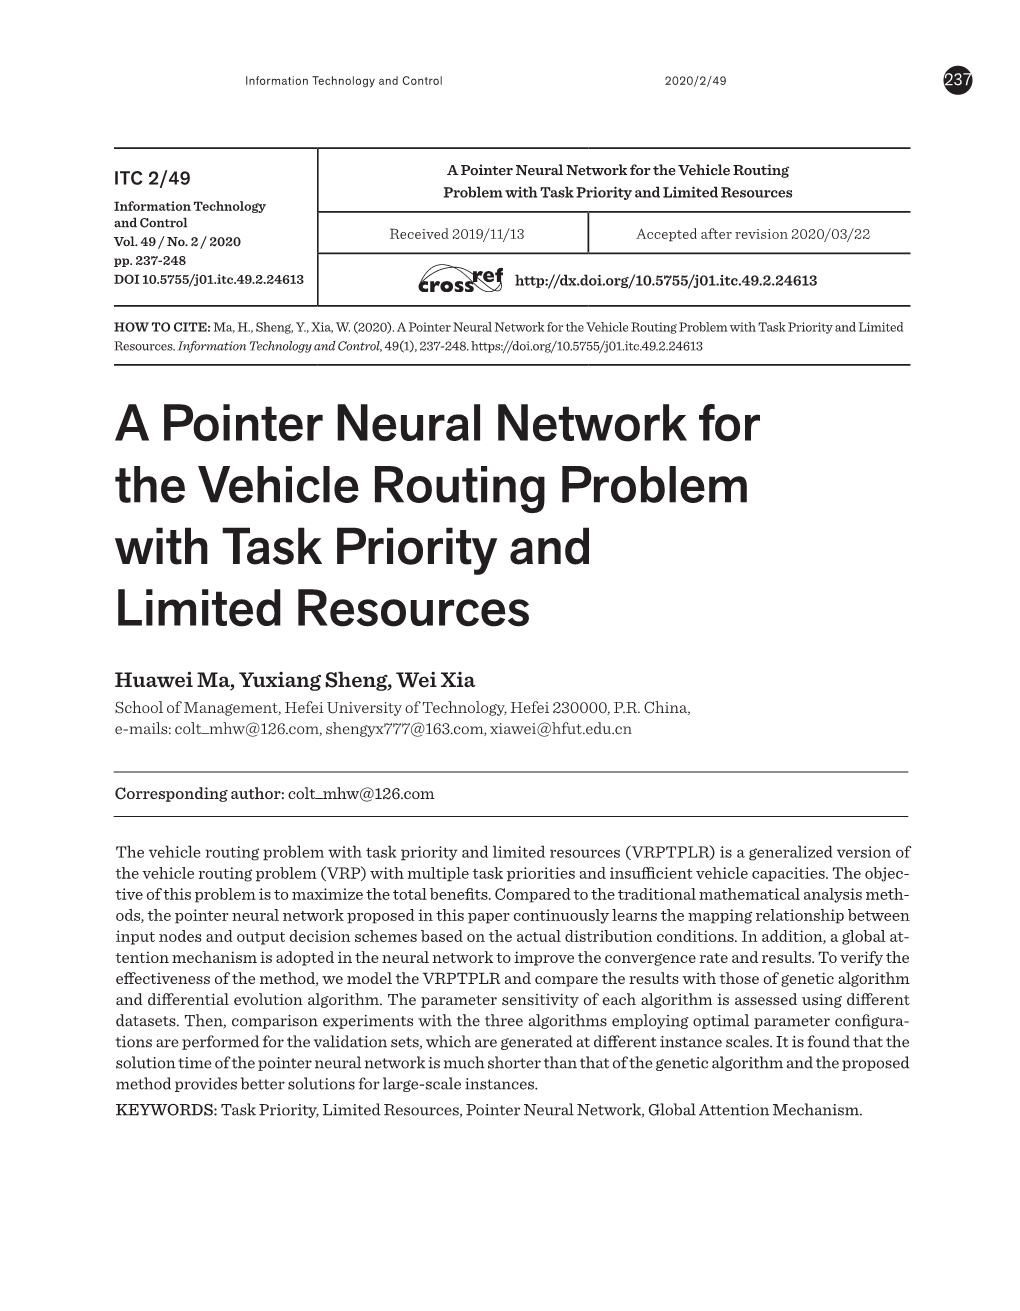 A Pointer Neural Network for the Vehicle Routing Problem with Task